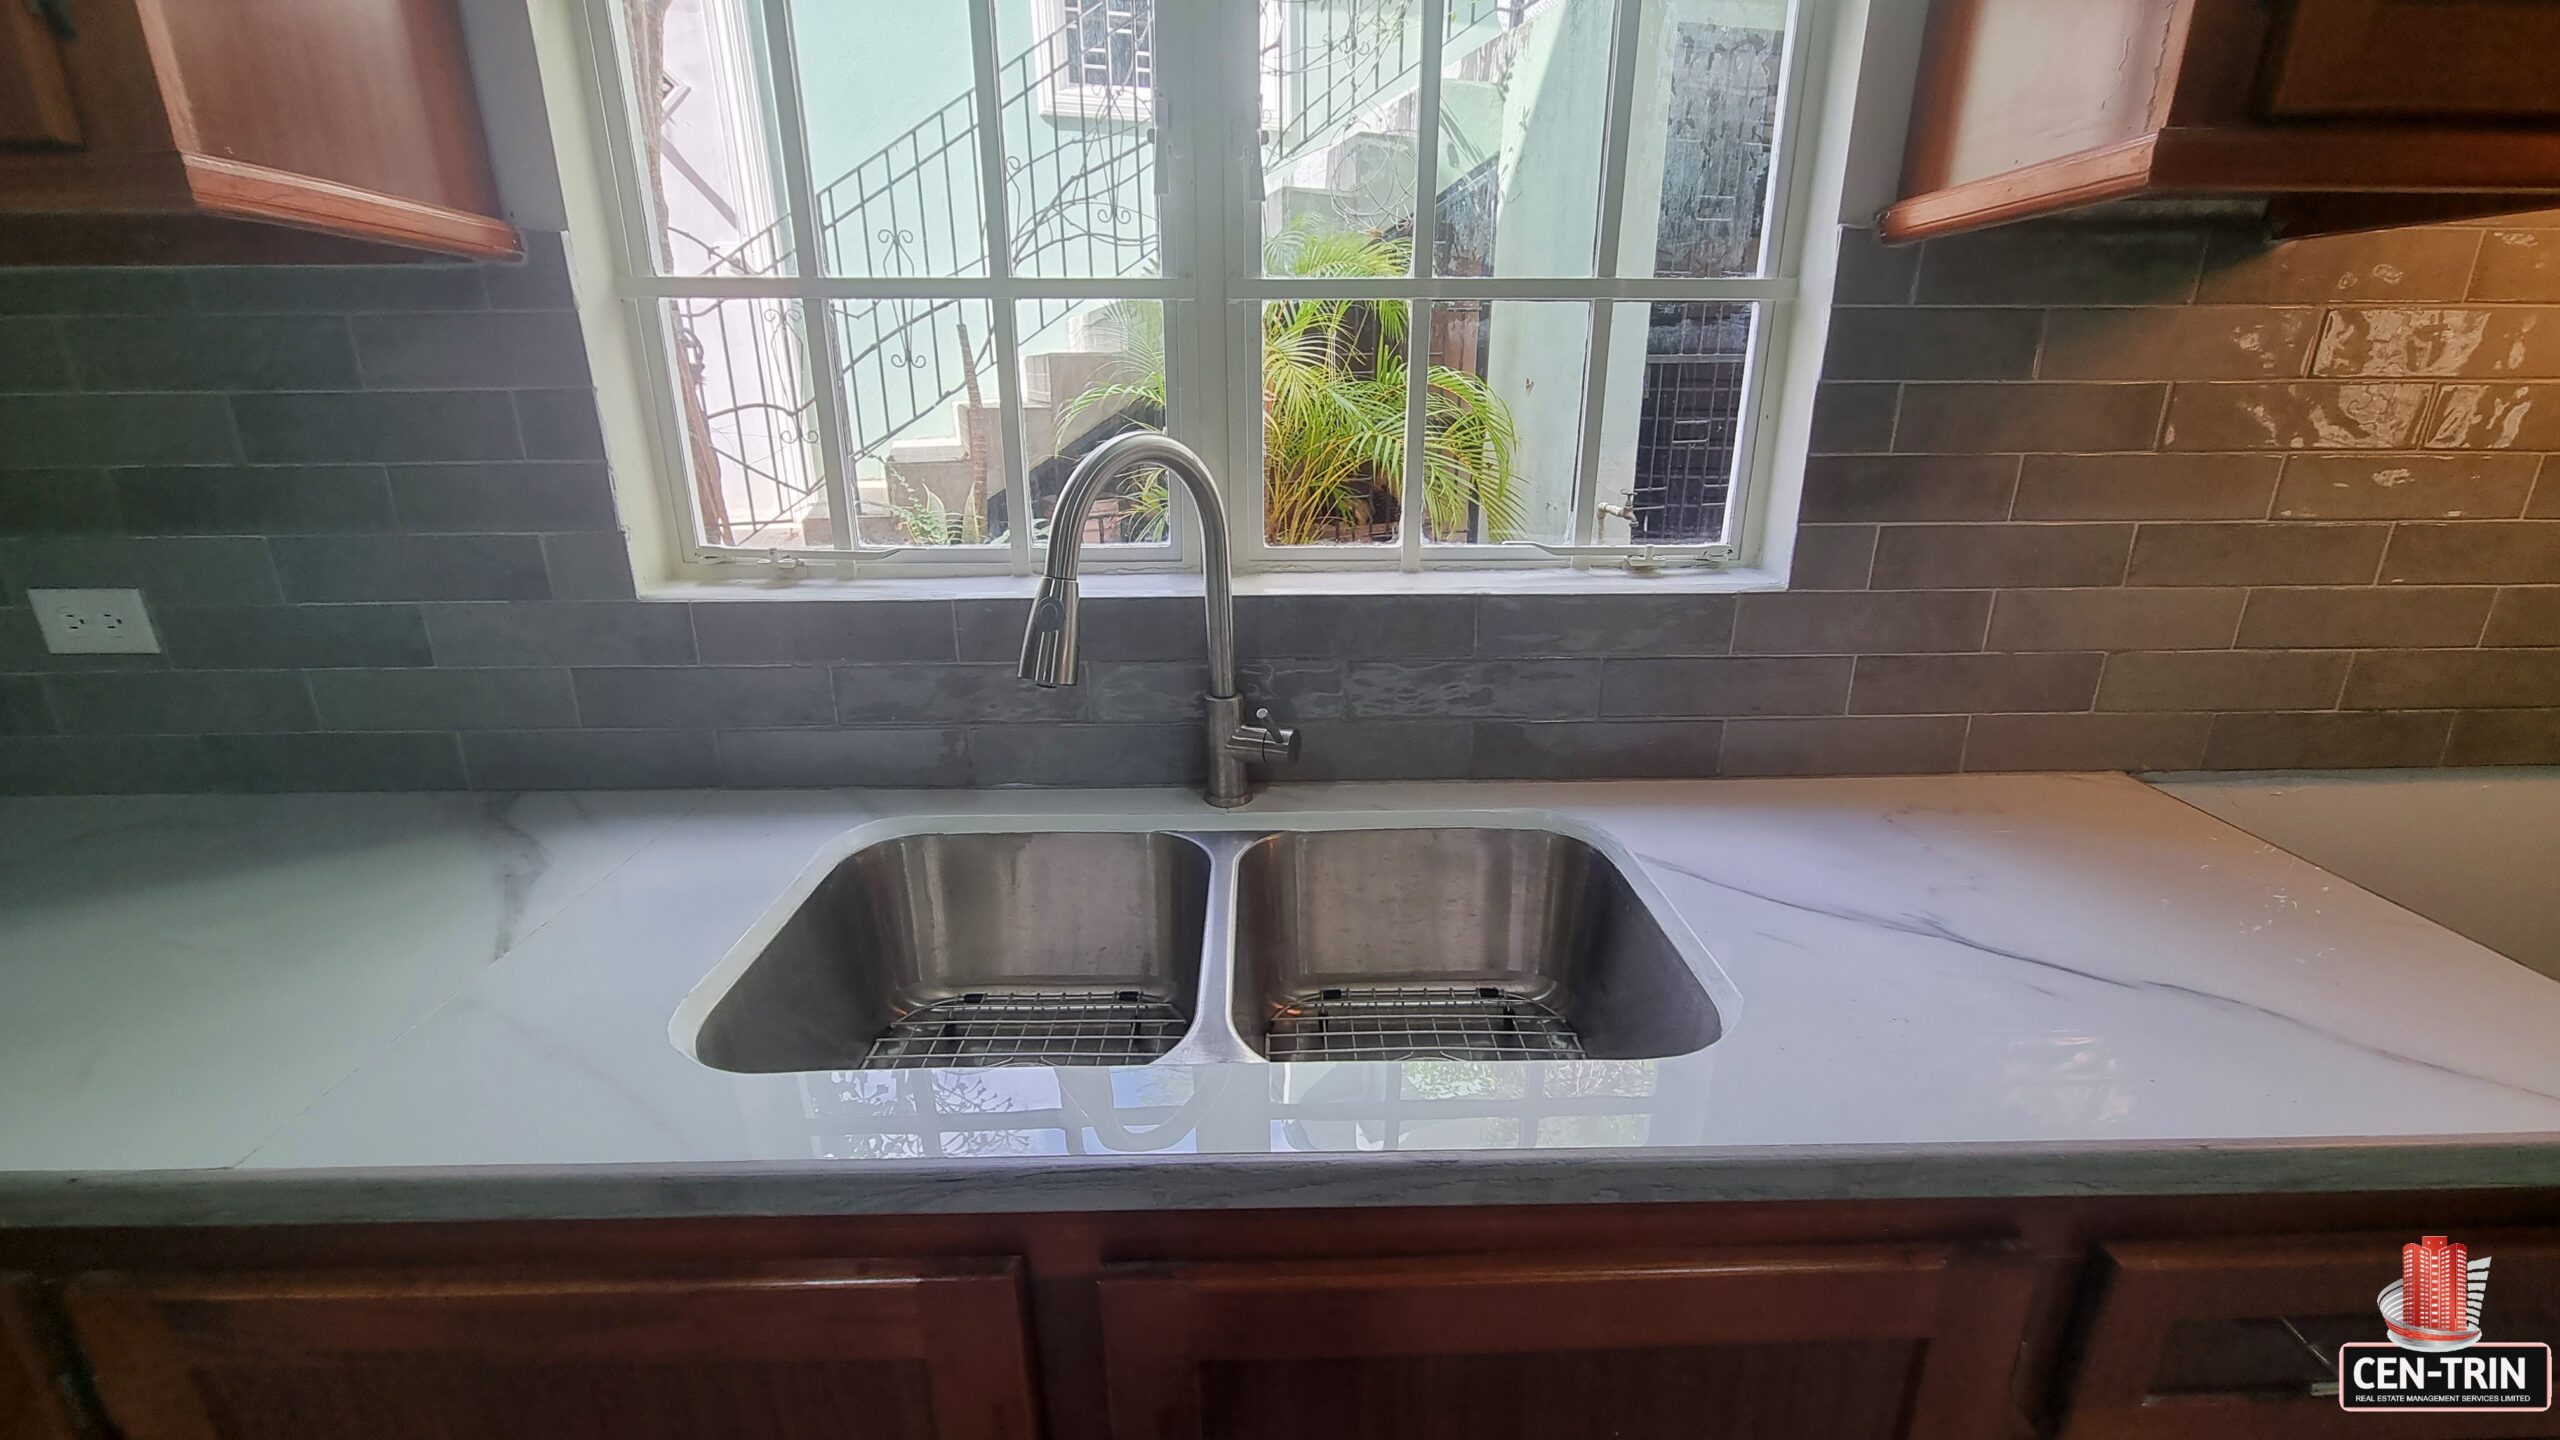 Double sink and window in kitchen of a 3 bedroom townhouse rental.